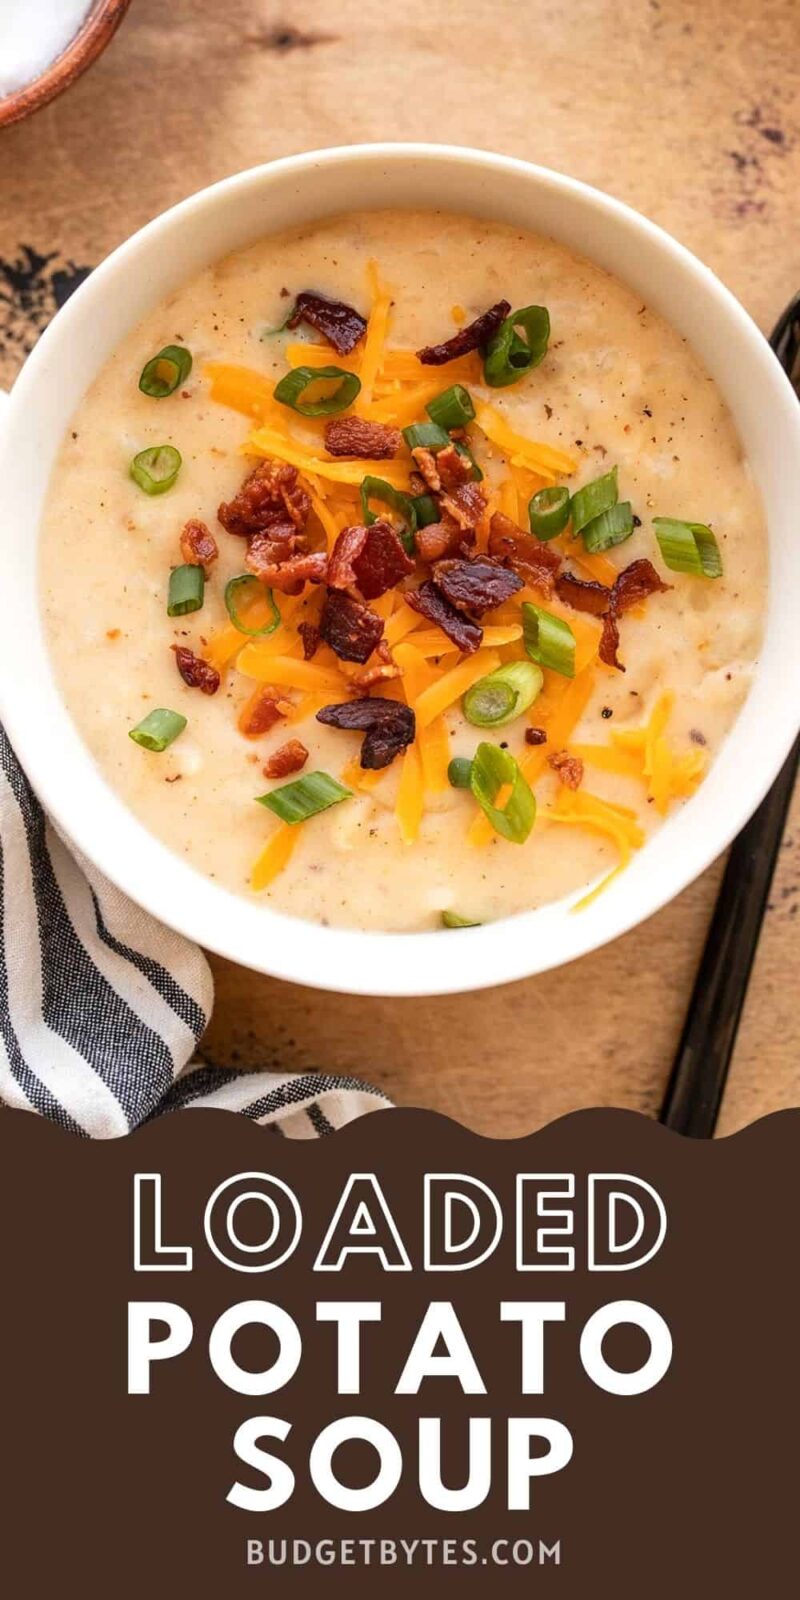 a bowl of potato soup with toppings, title text at the bottom.